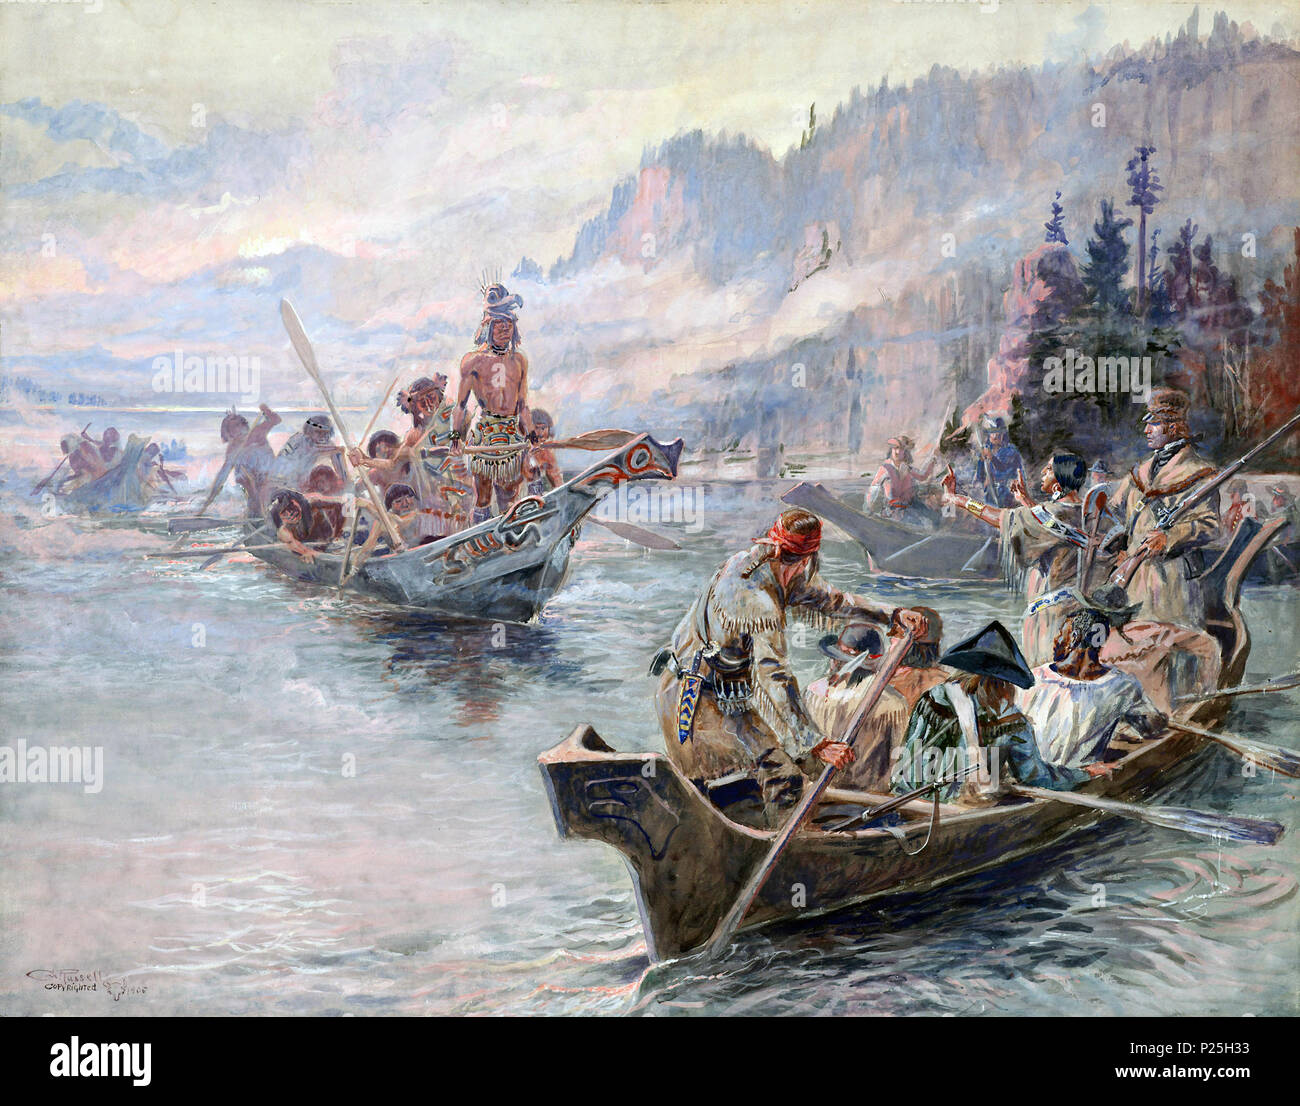 .  English: Painting Lewis and Clark on the Lower Columbia (28 × 24 in (71.1 × 60.9 cm)) by Charles Marion Russell; Opaque and transparent watercolor over graphite underdrawing on paper . 1905.    Charles Marion Russell  (1864–1926)     Alternative names Charles M. Russell, C.M. Russell, Charlie Russell, 'Kid' Russell  Description American sculptor, illustrator, painter and writer  Date of birth/death 19 March 1864 24 October 1926  Location of birth/death Oak Hill, St. Louis, Missouri USA Great Falls, Montana, USA  Authority control  : Q1065418 VIAF: 67266991 ISNI: 0000 0001 1068 7318 ULAN: 50 Stock Photo